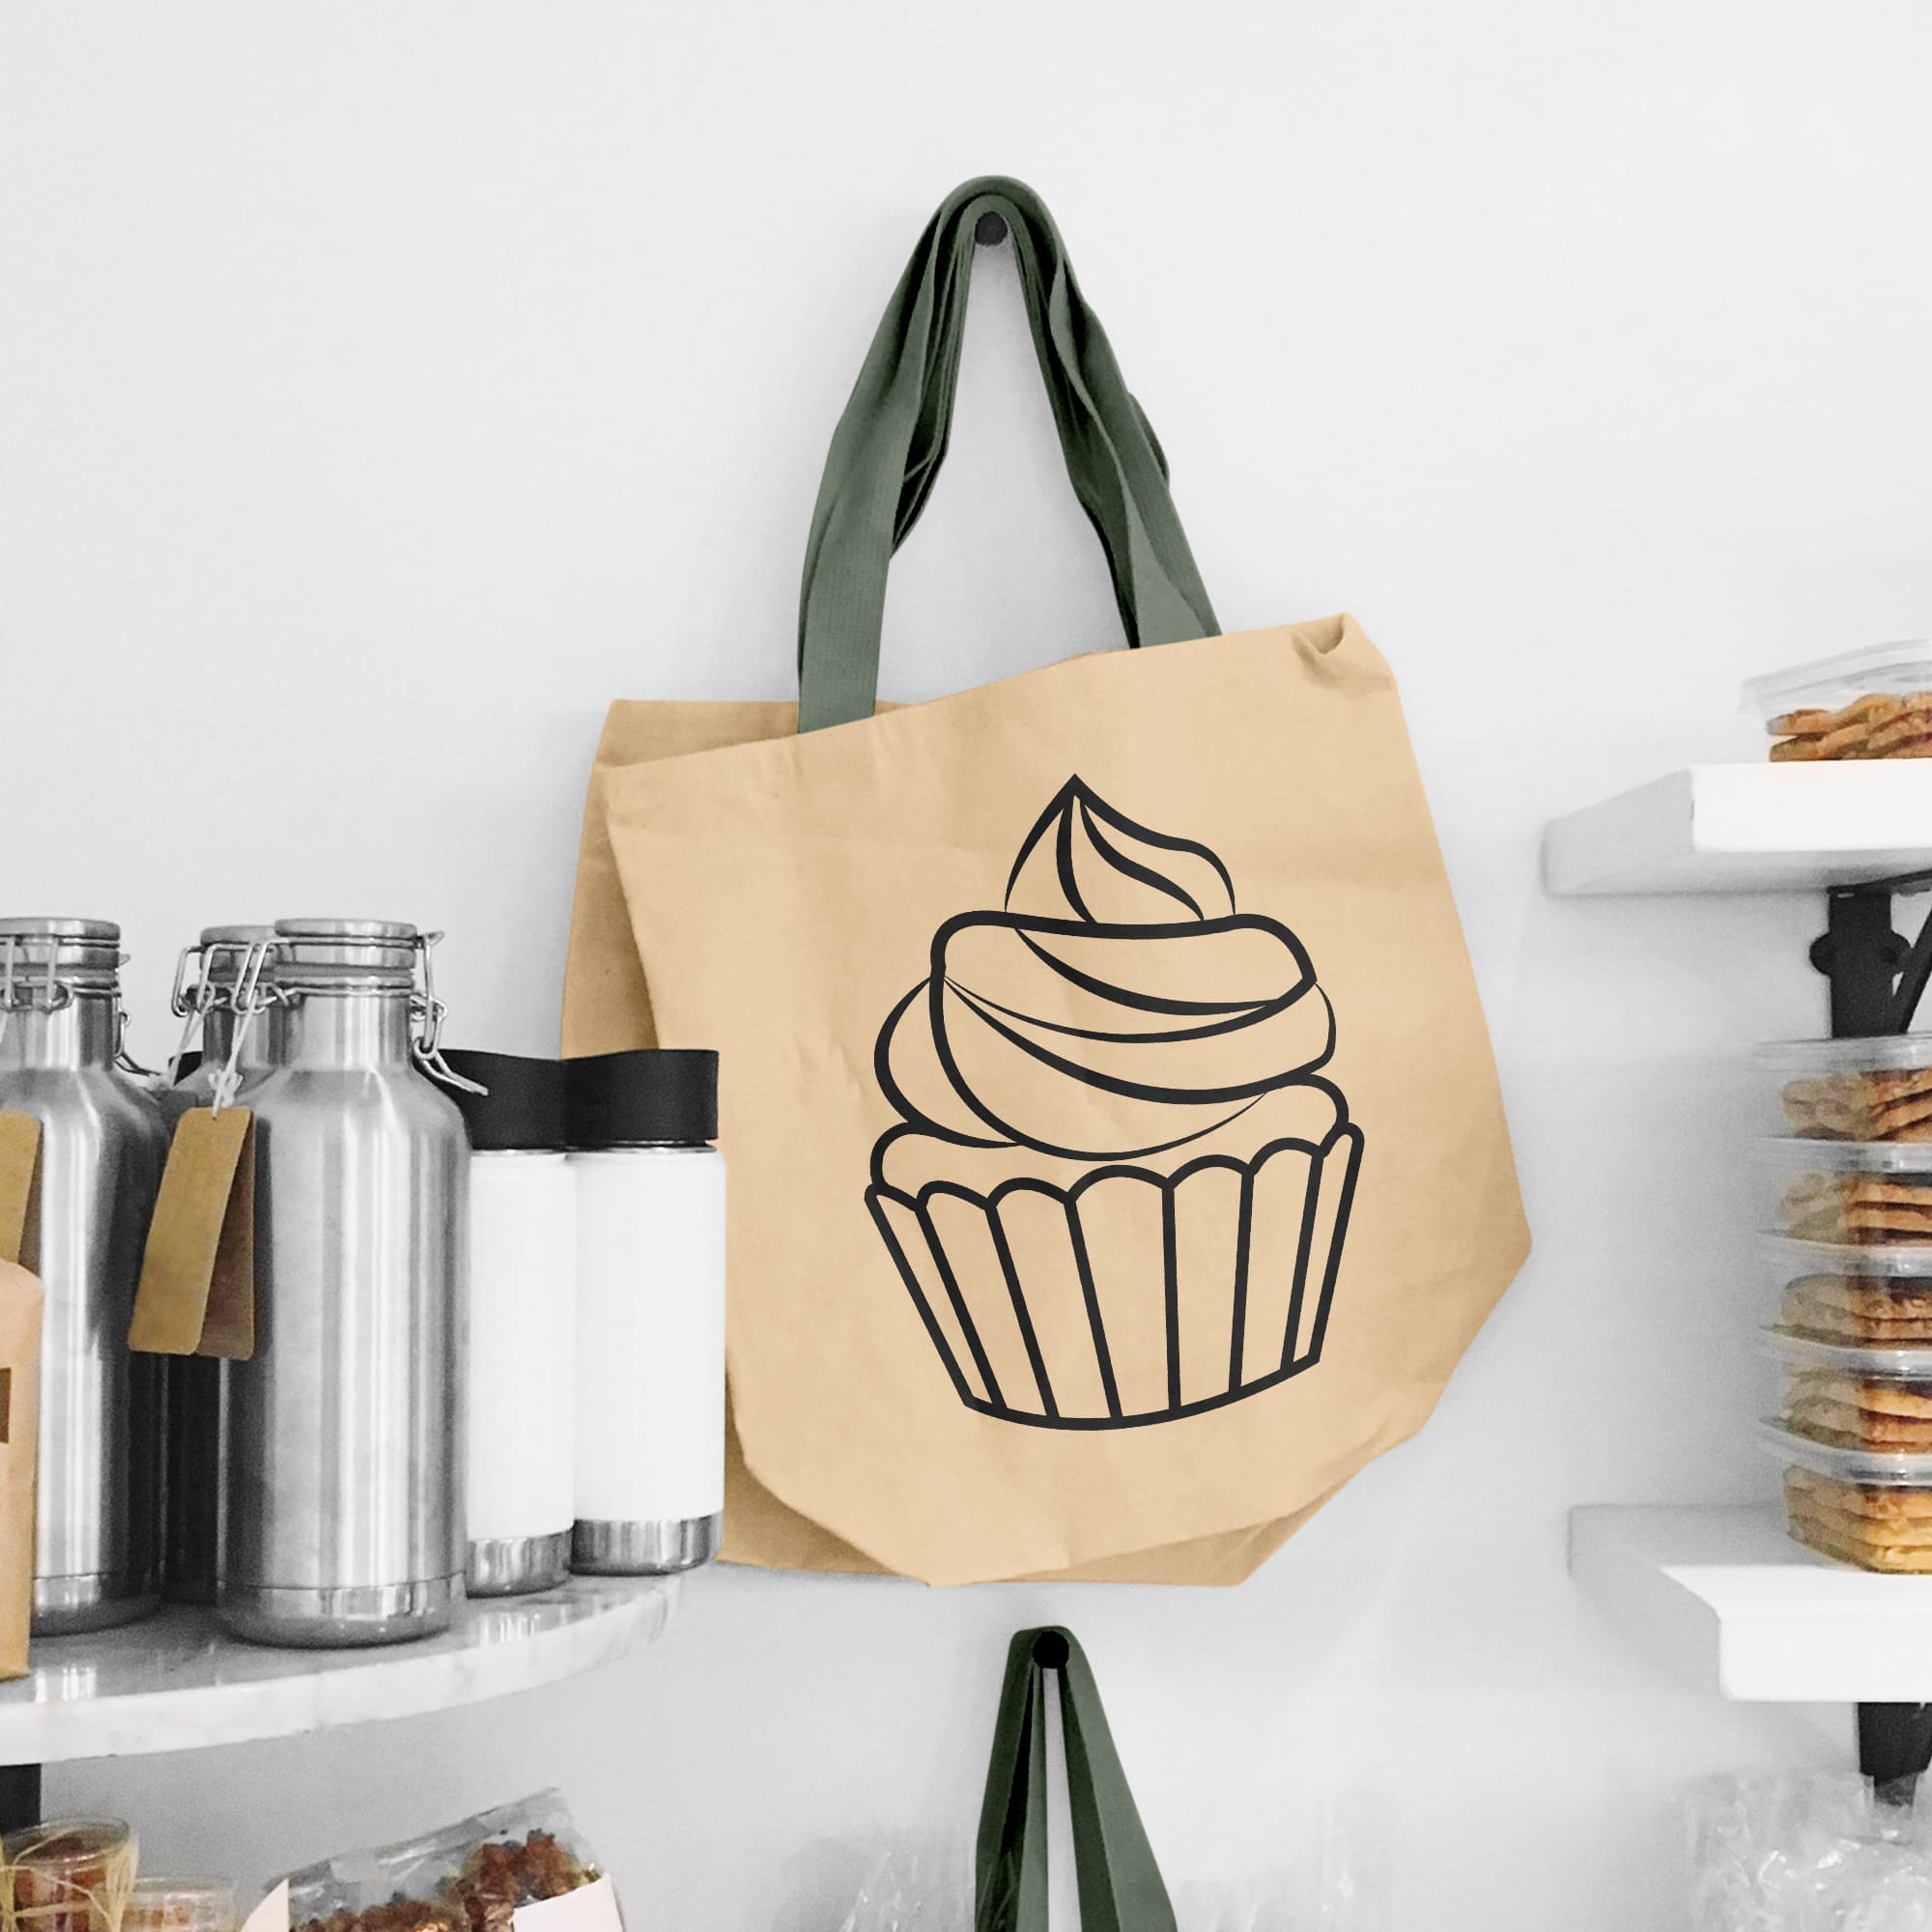 The outline of the cupcake is drawn on a grocery bag.